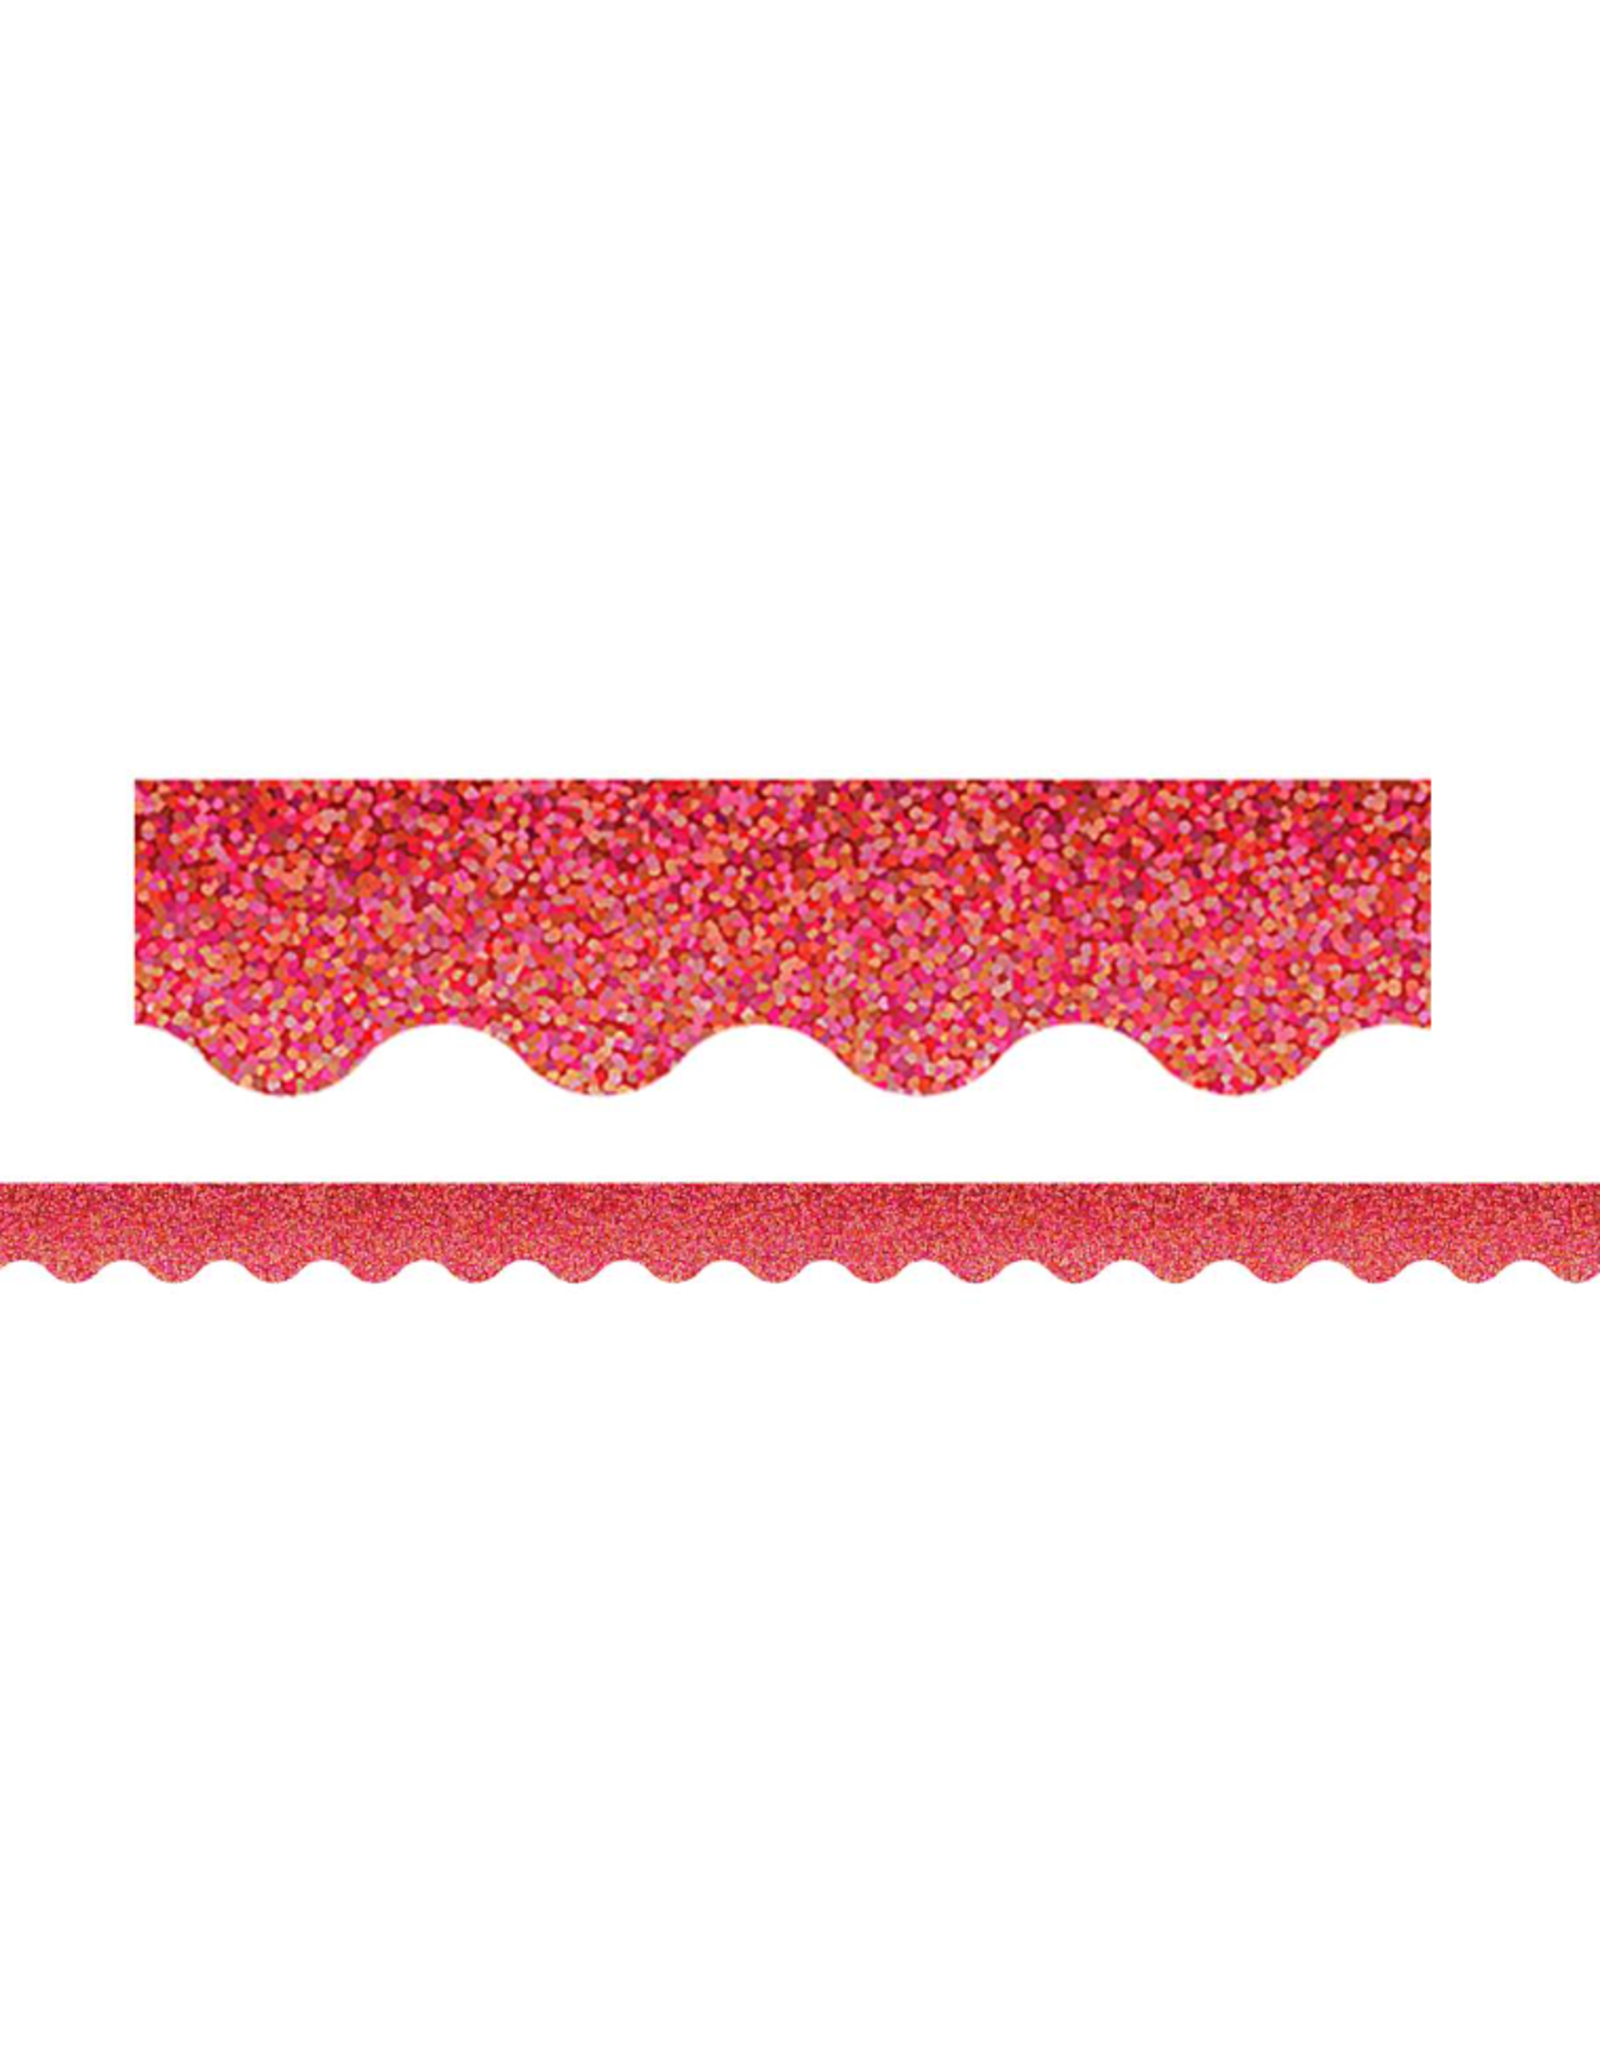 TCR SCALLOPED BORDER SPARKLE  RED  - 2 3/16"X35'